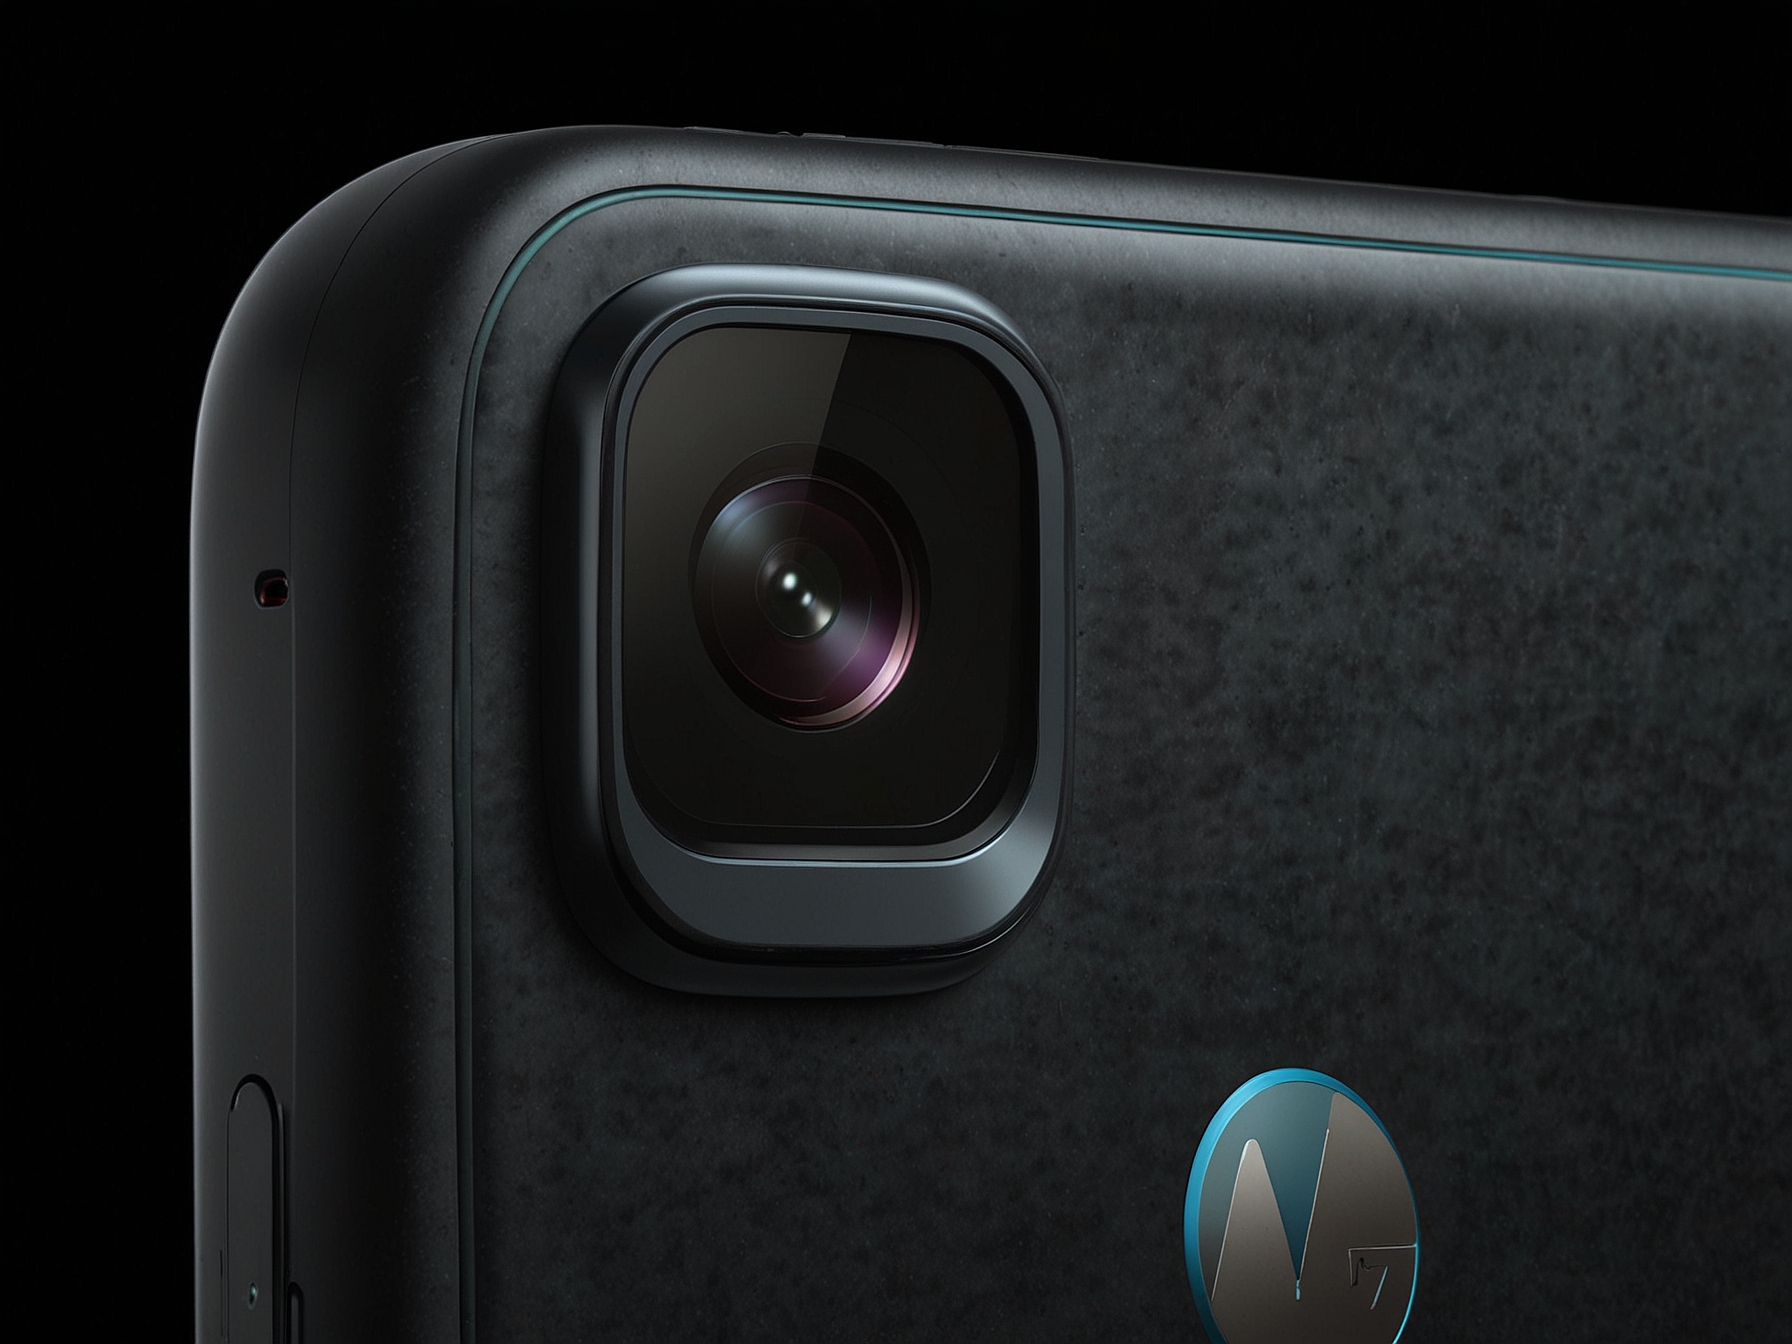 A close-up view of the Moto G85's versatile camera setup, featuring multiple lenses including a high-resolution main sensor and ultra-wide lens, highlighting its photography capabilities.